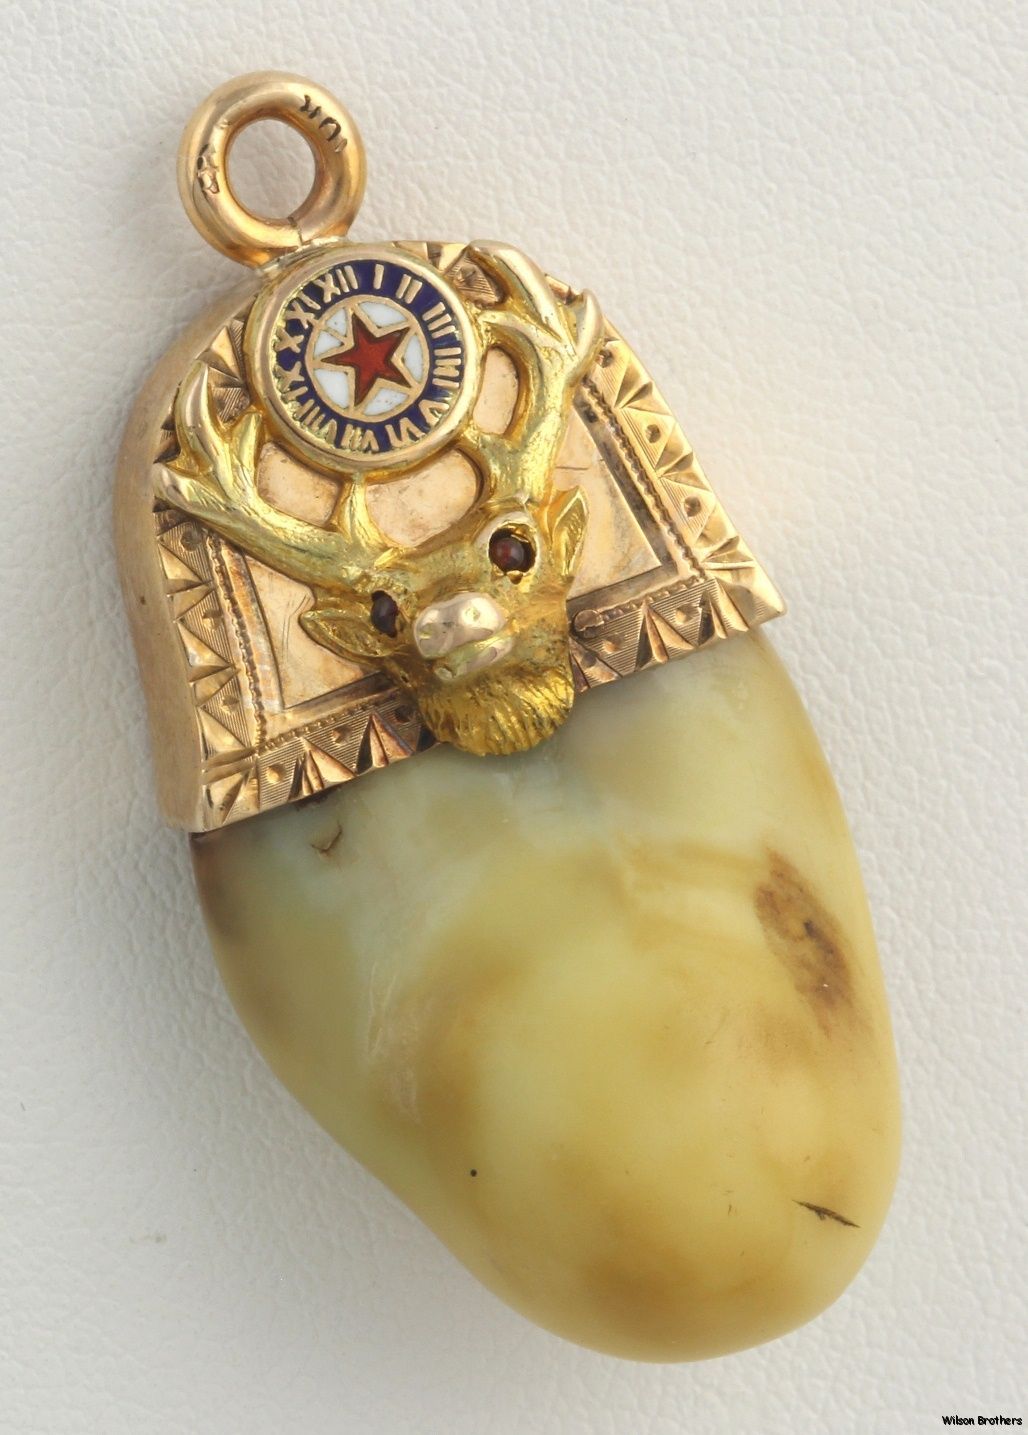 Faux Pboe Elk Tooth Fob 10K Solid Yellow Gold Vintage Enamel Polished